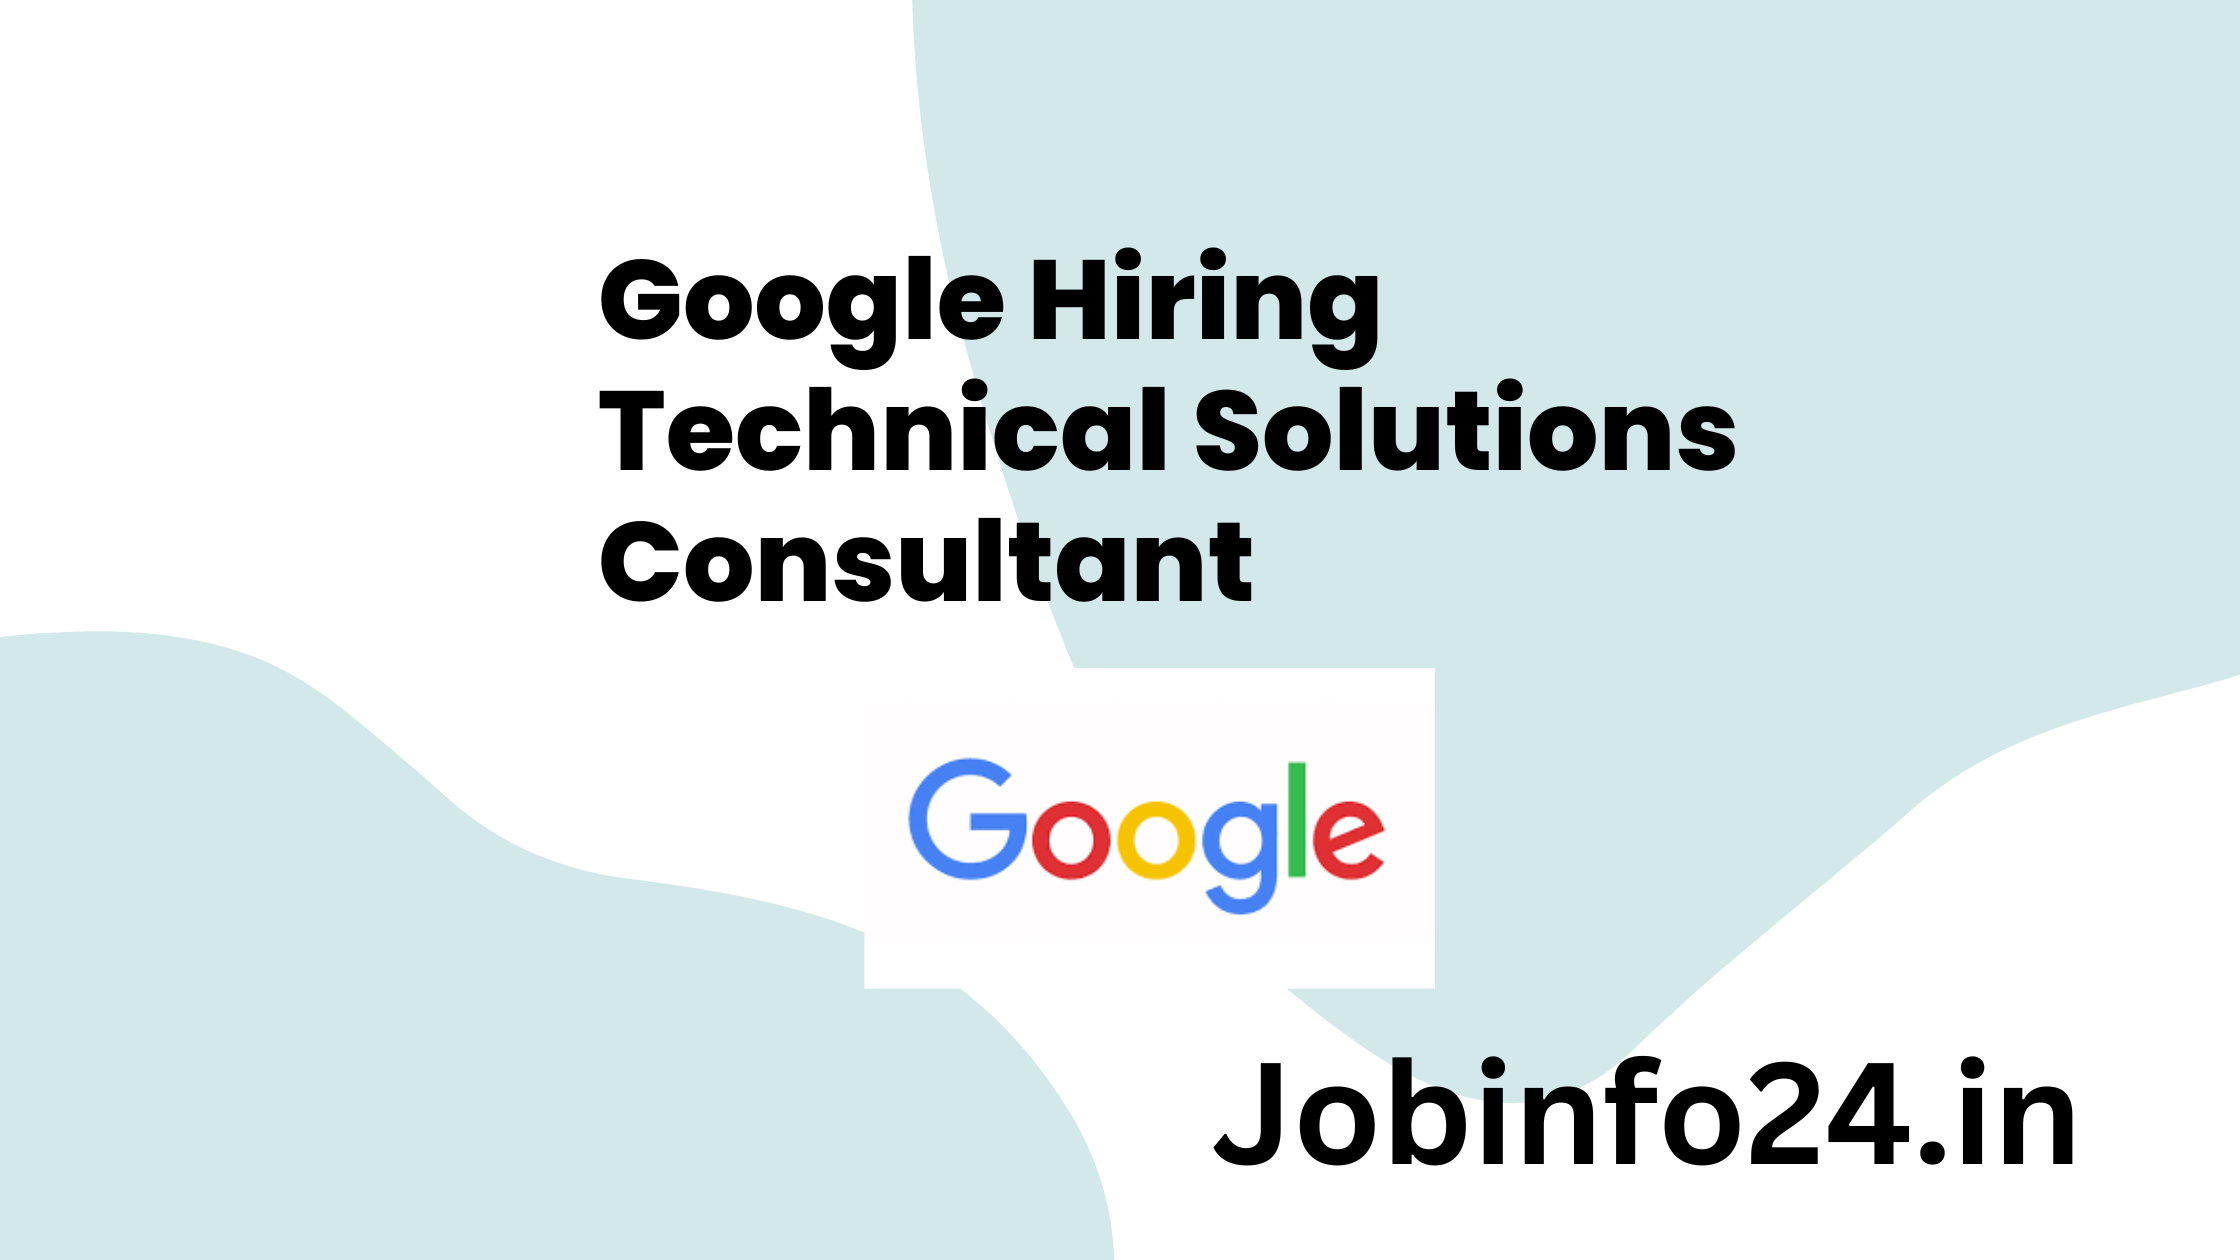 Google Hiring Technical Solutions Consultant